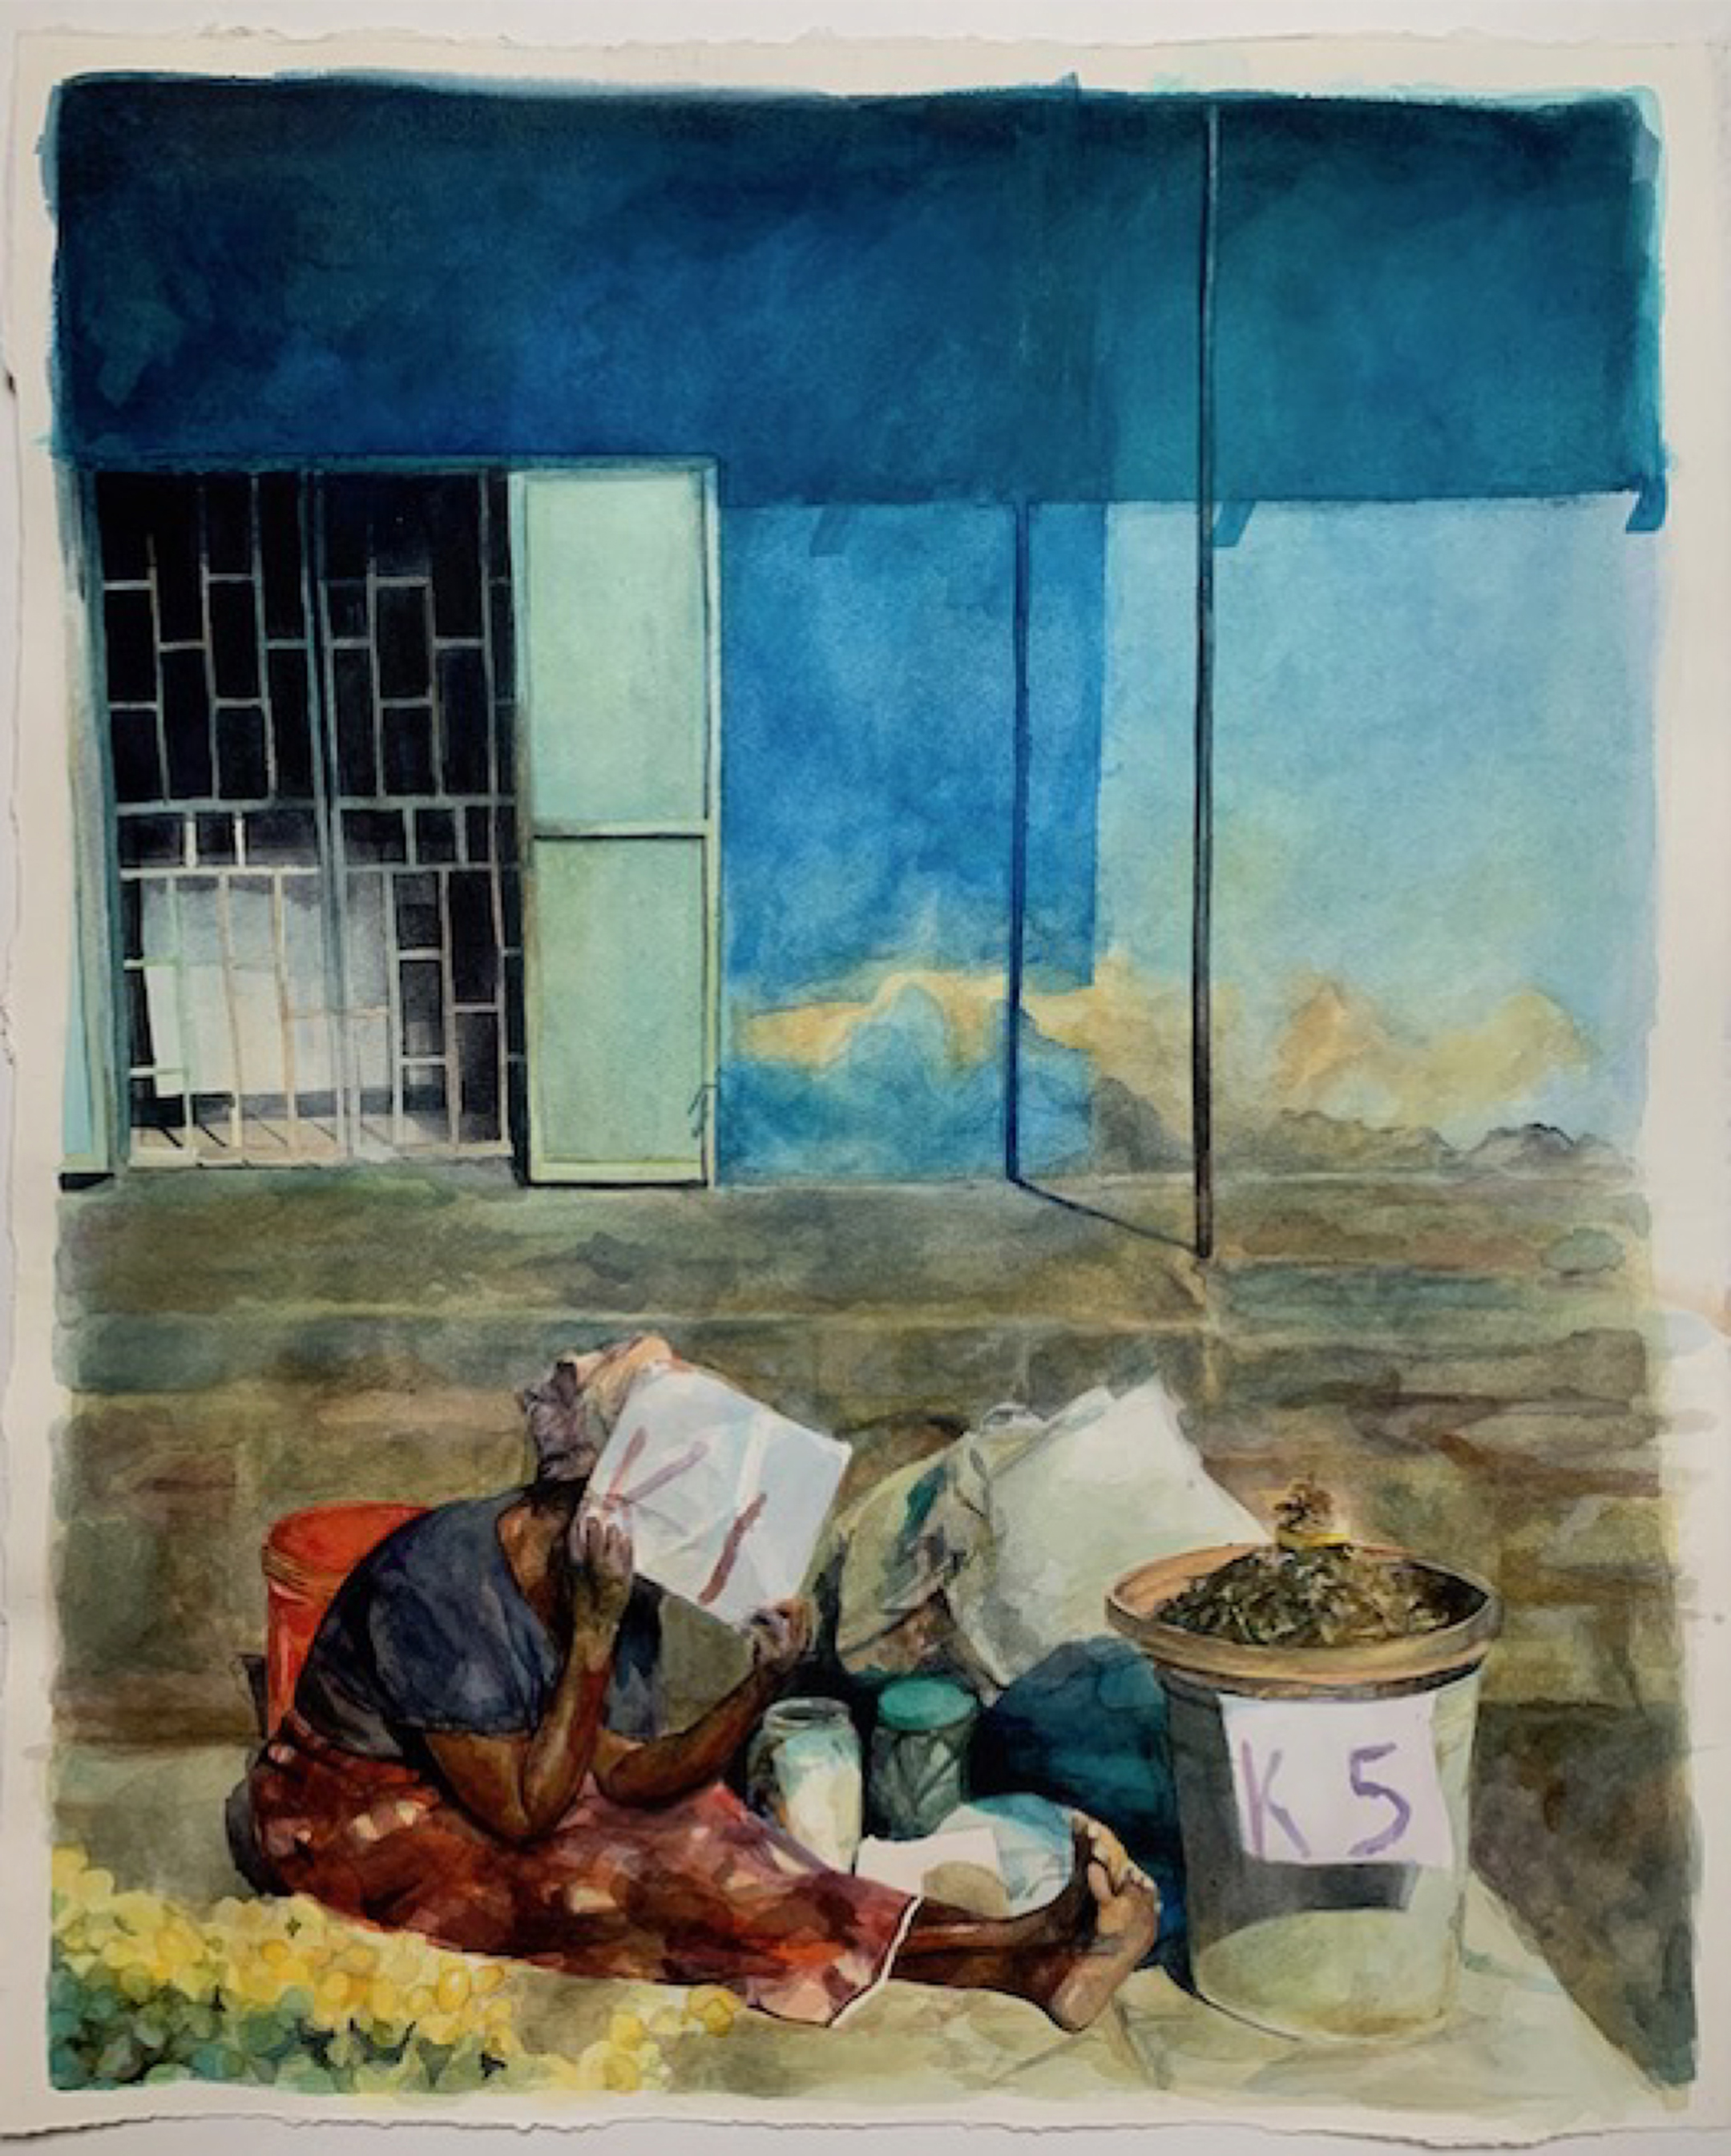 Illustration of a woman sitting on the ground, with a bundle of belongings, shielding her face, in front of a building